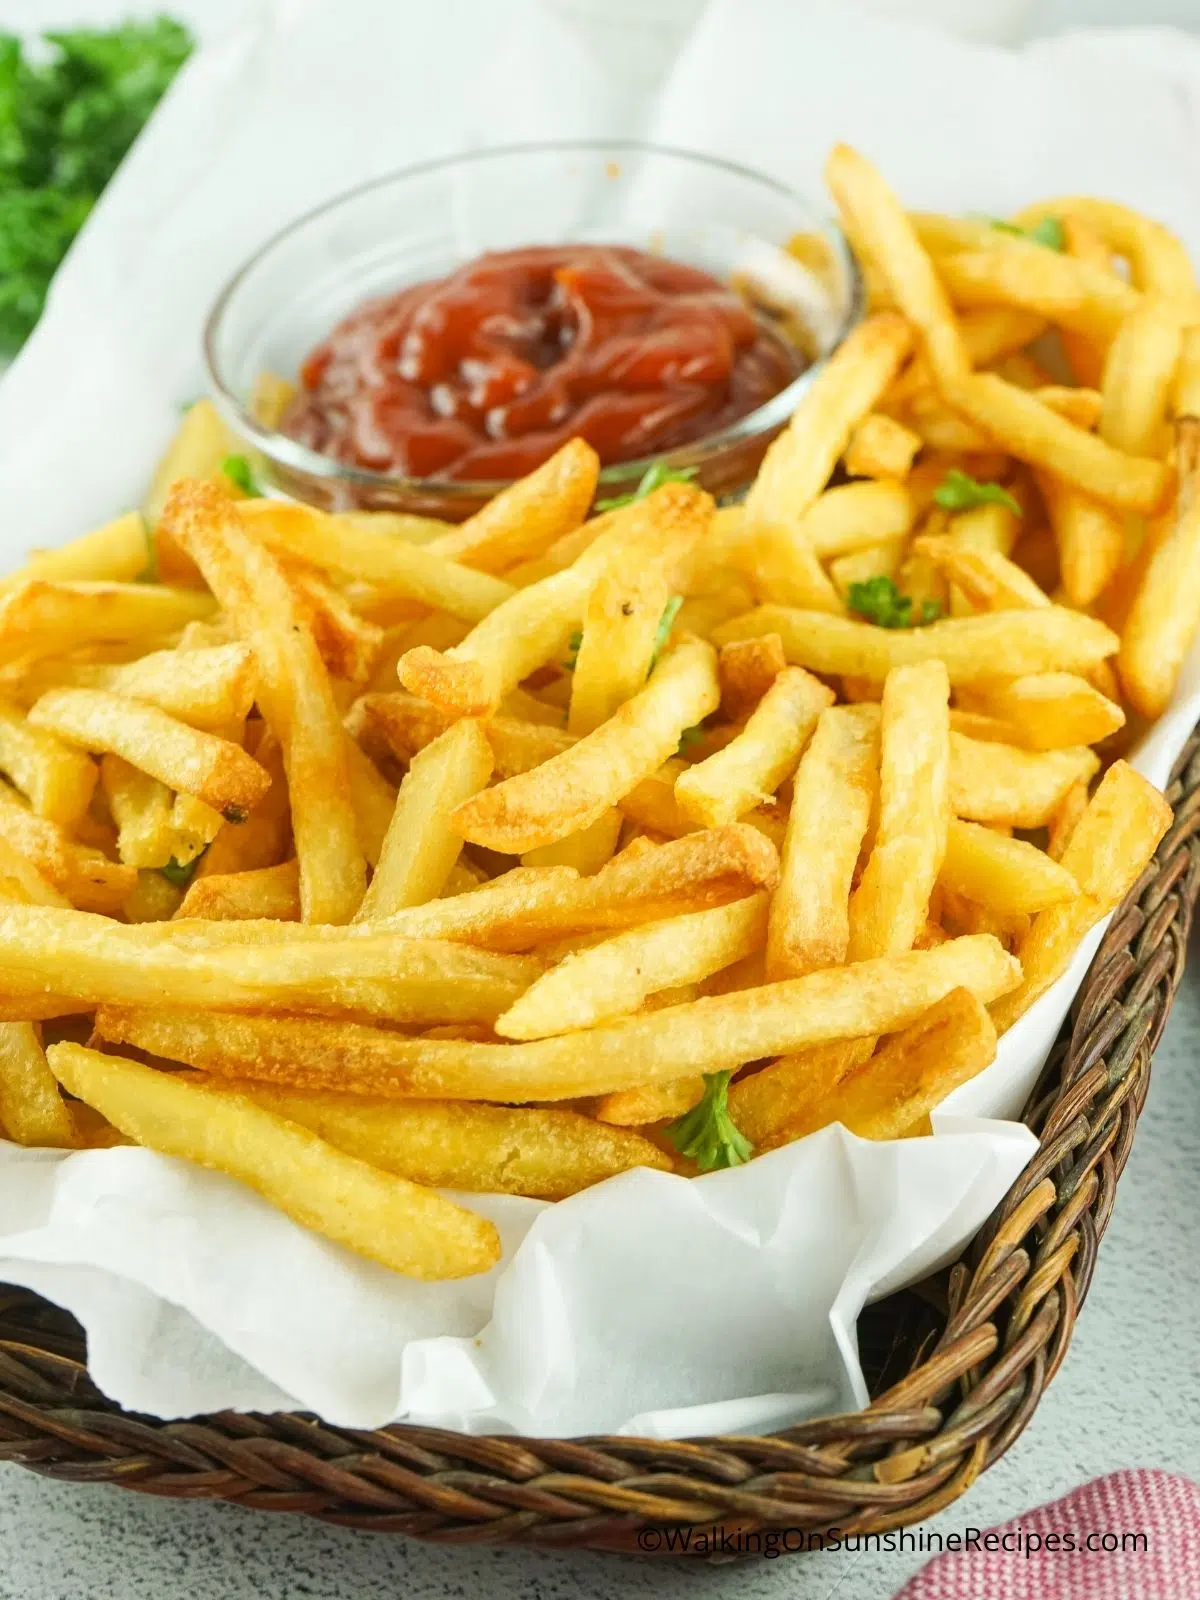 Basket tray of French Fries with bowl of ketchup.